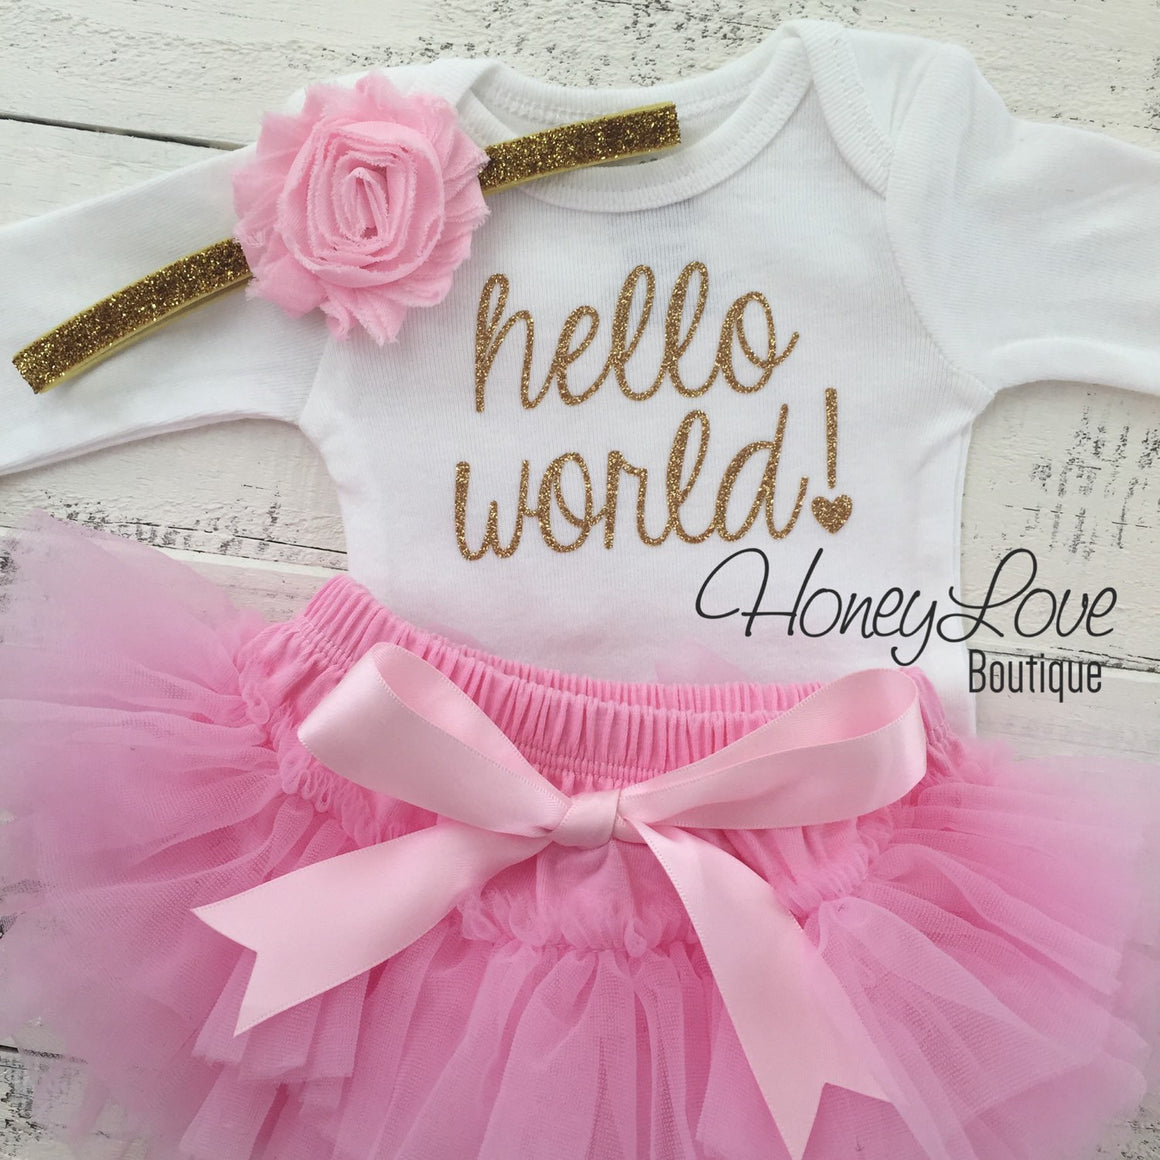 hello world! Outfit - Light Pink and Gold/Silver glitter - HoneyLoveBoutique